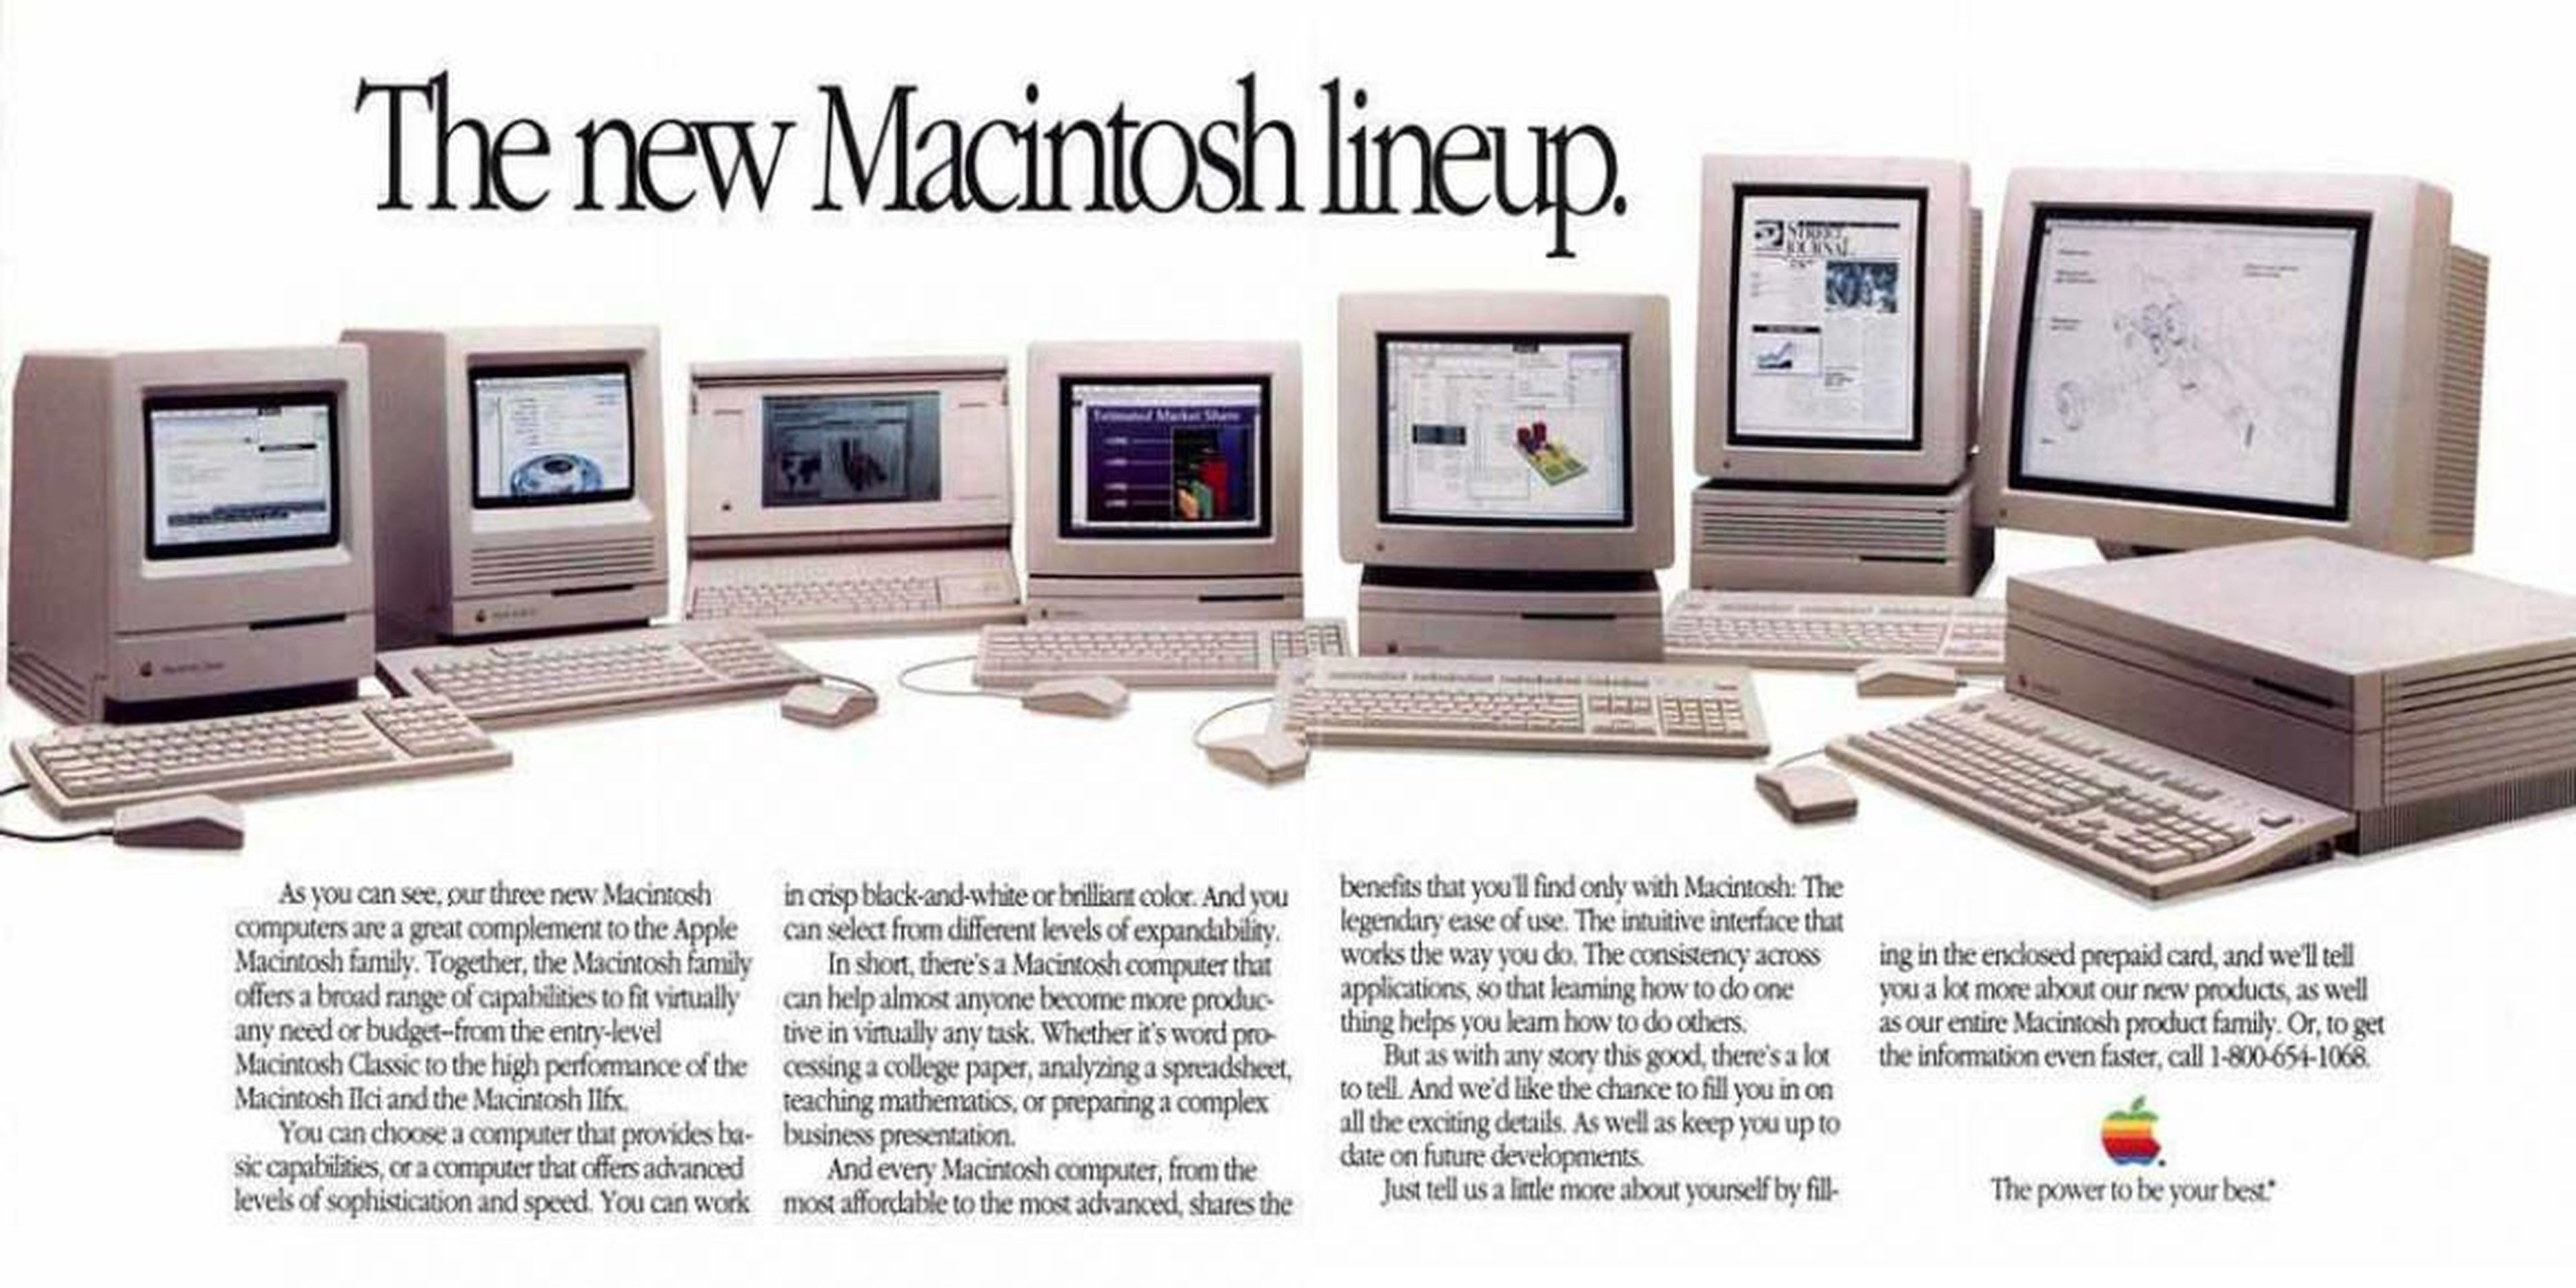 There are hundreds more old Apple ads and brochures on macmothership.com.